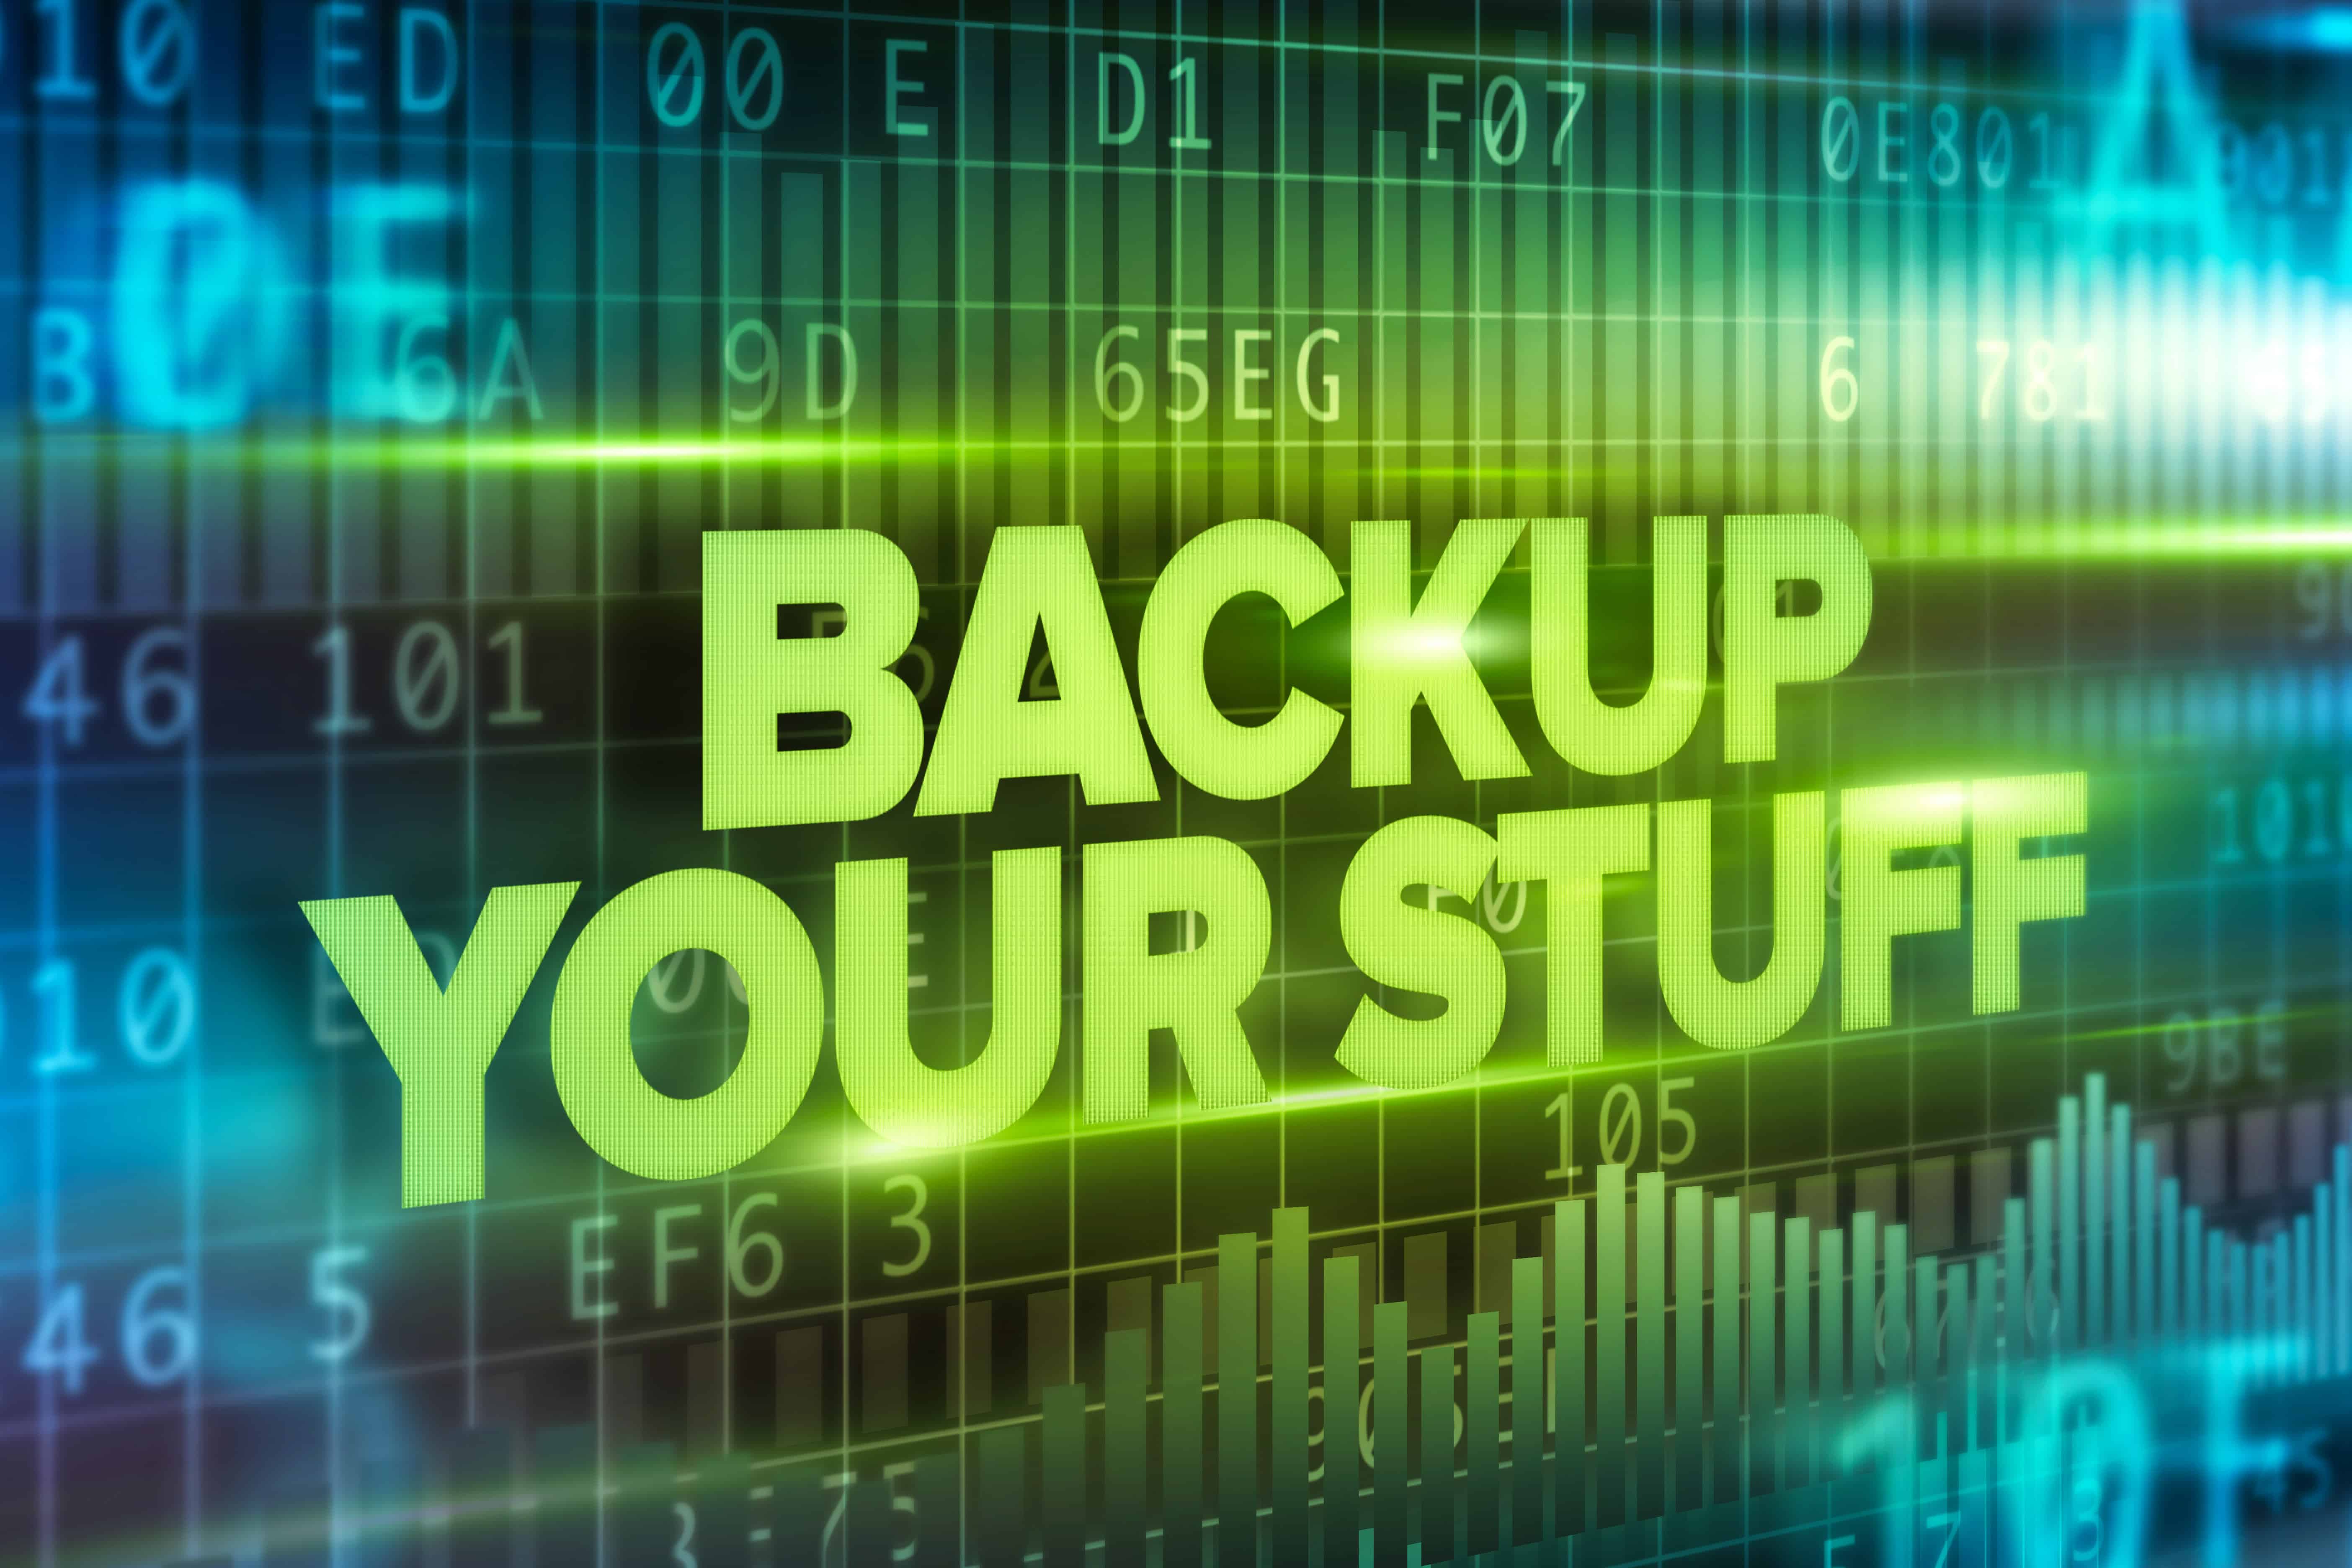 Backup your stuff abstract concept blue text blue background